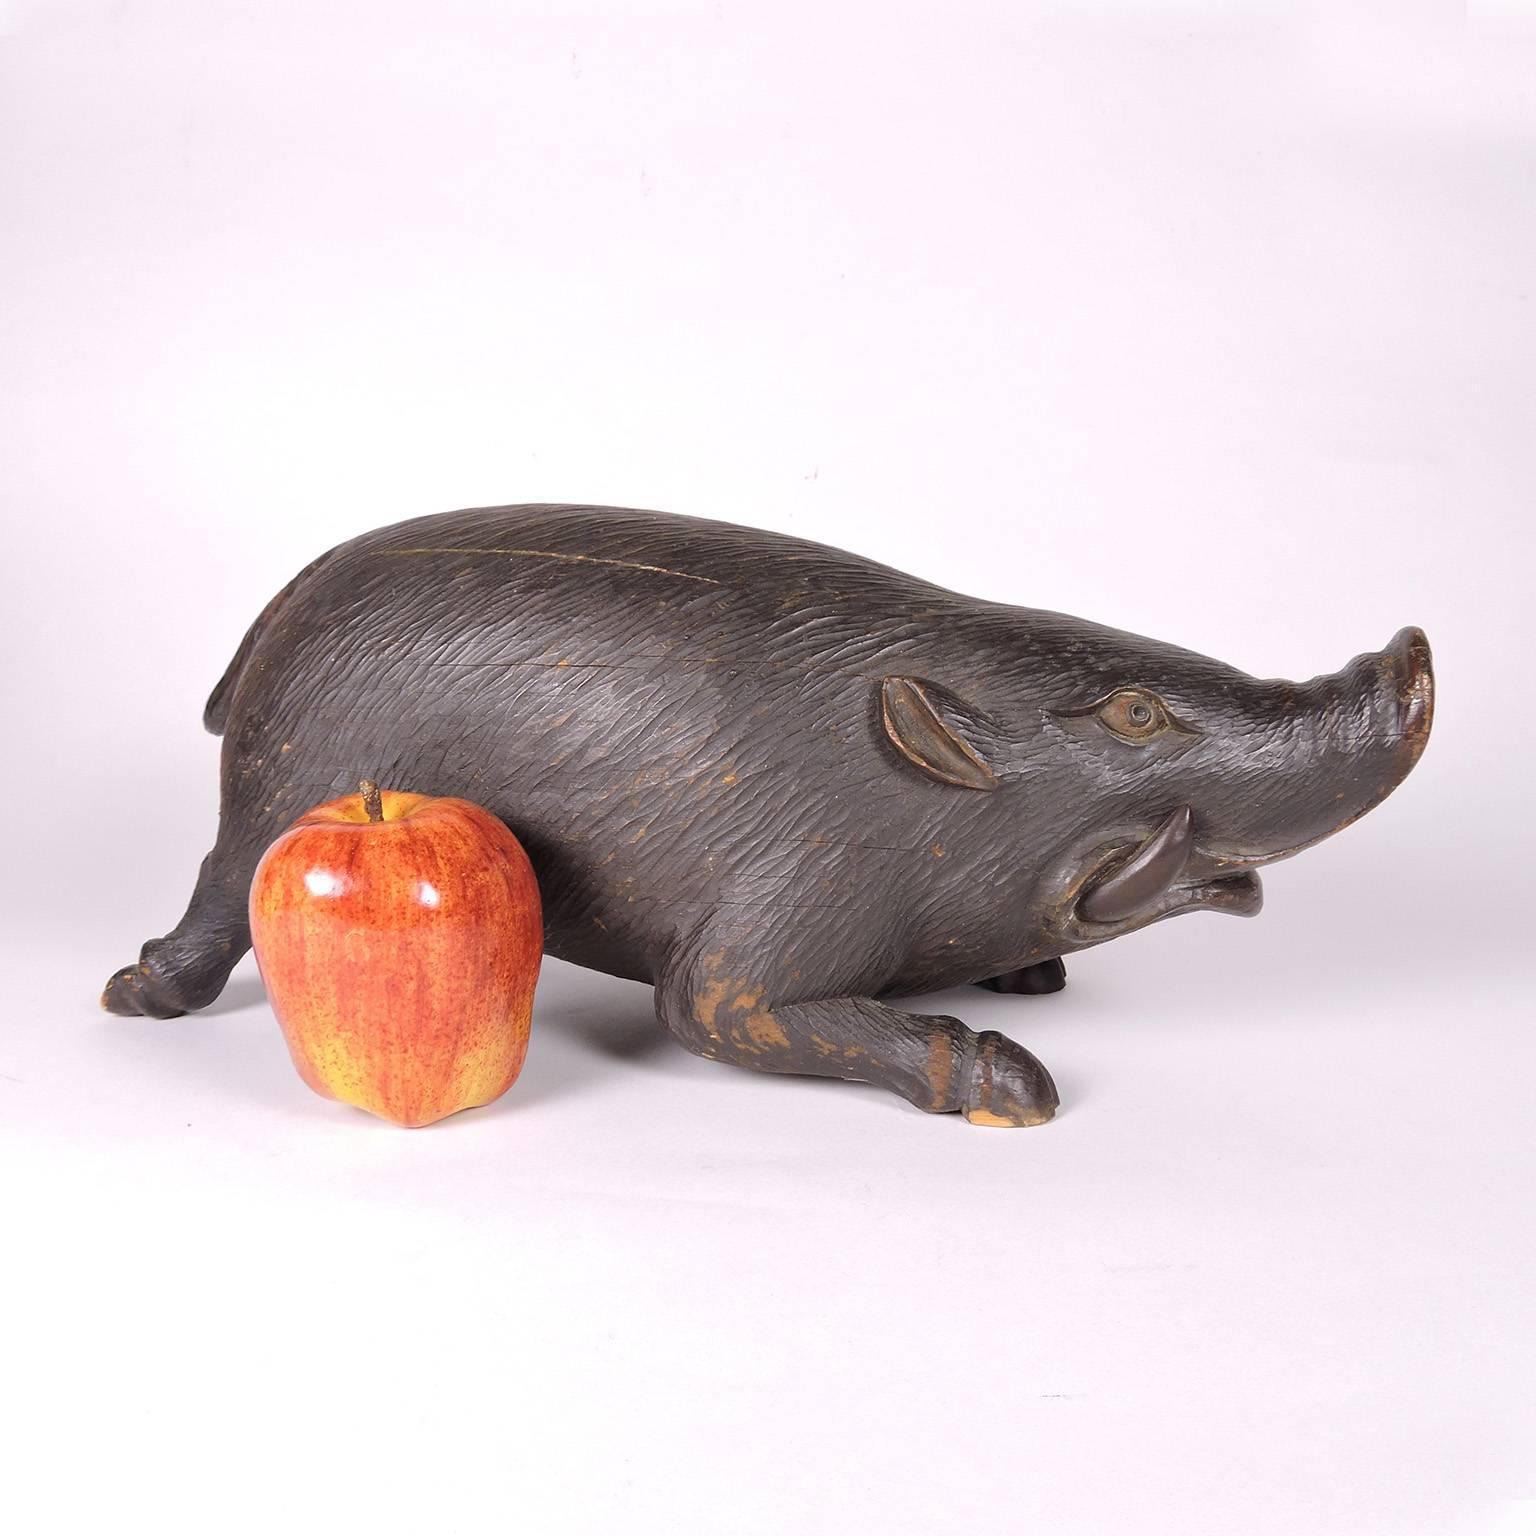 19th century Black Forest carved figure of a boar. Exceptional carving and patina.
Measures: Length 16 in., height 6 3/4 in., width 5 in.